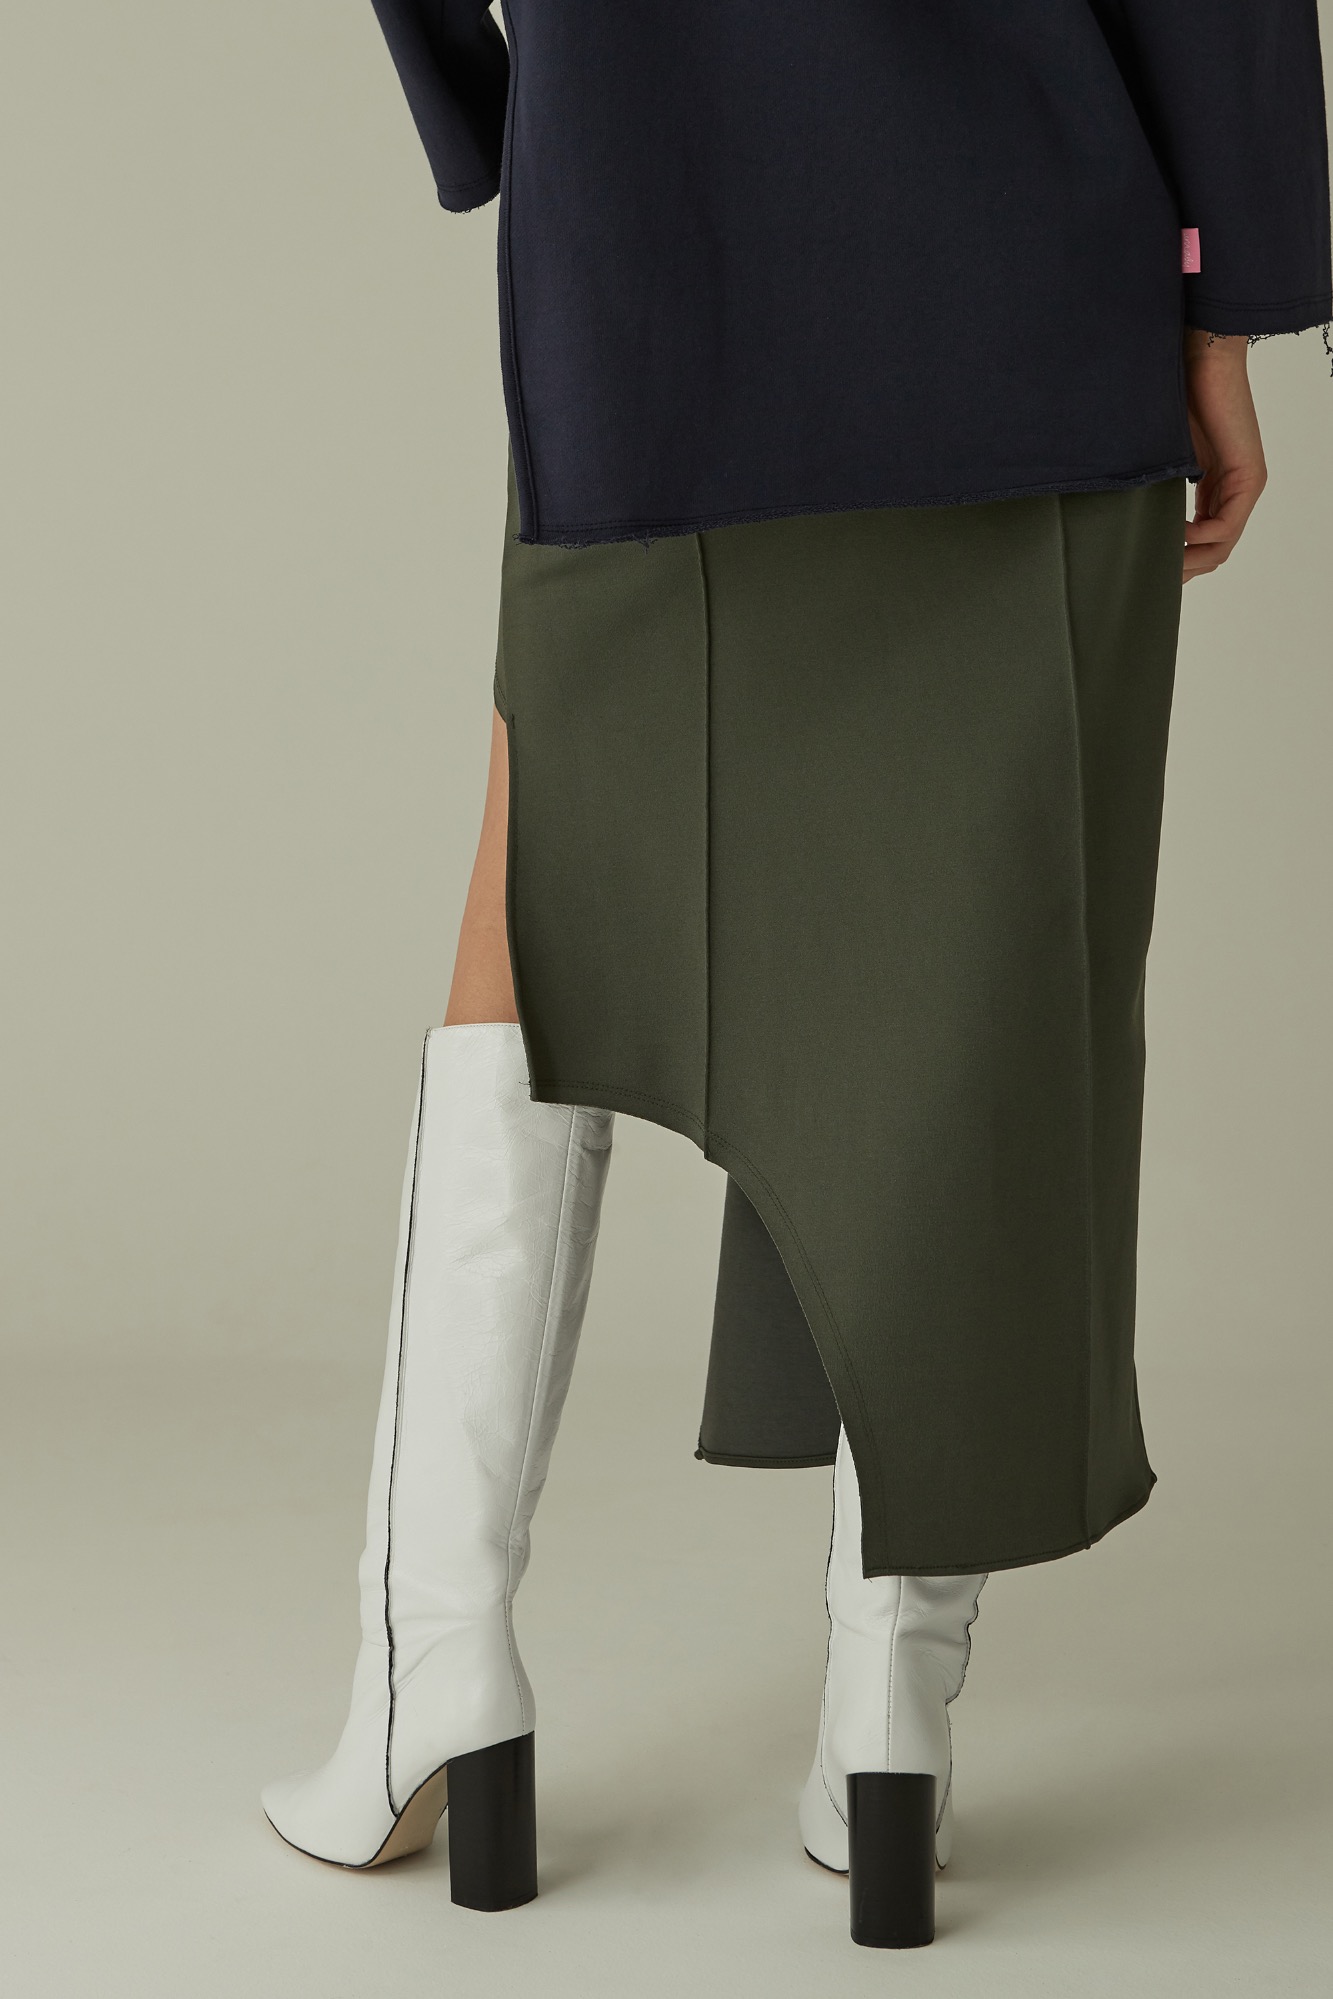 Curved Line Cut-out Skirt - Khaki